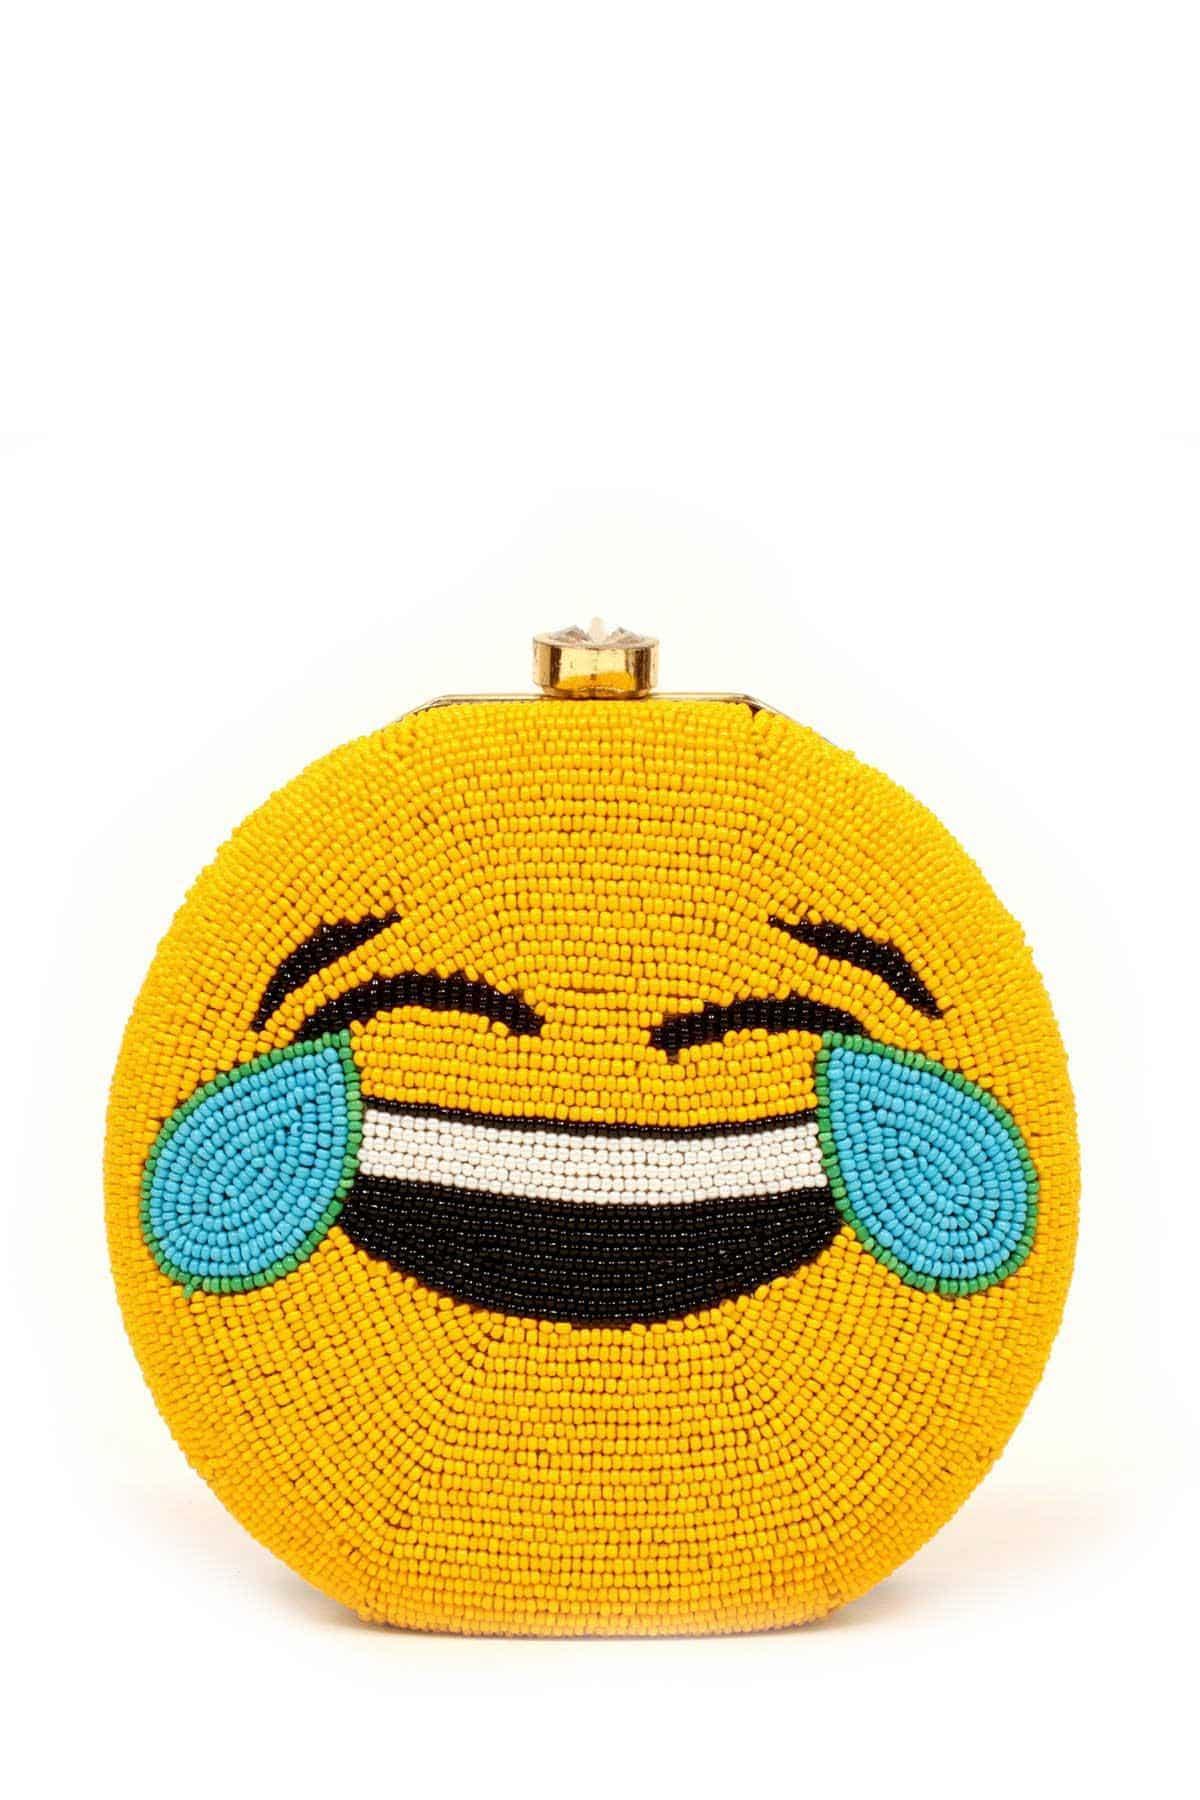 Buy SMILEY Face Emoji Seed Beaded Coin Purse Online in India - Etsy